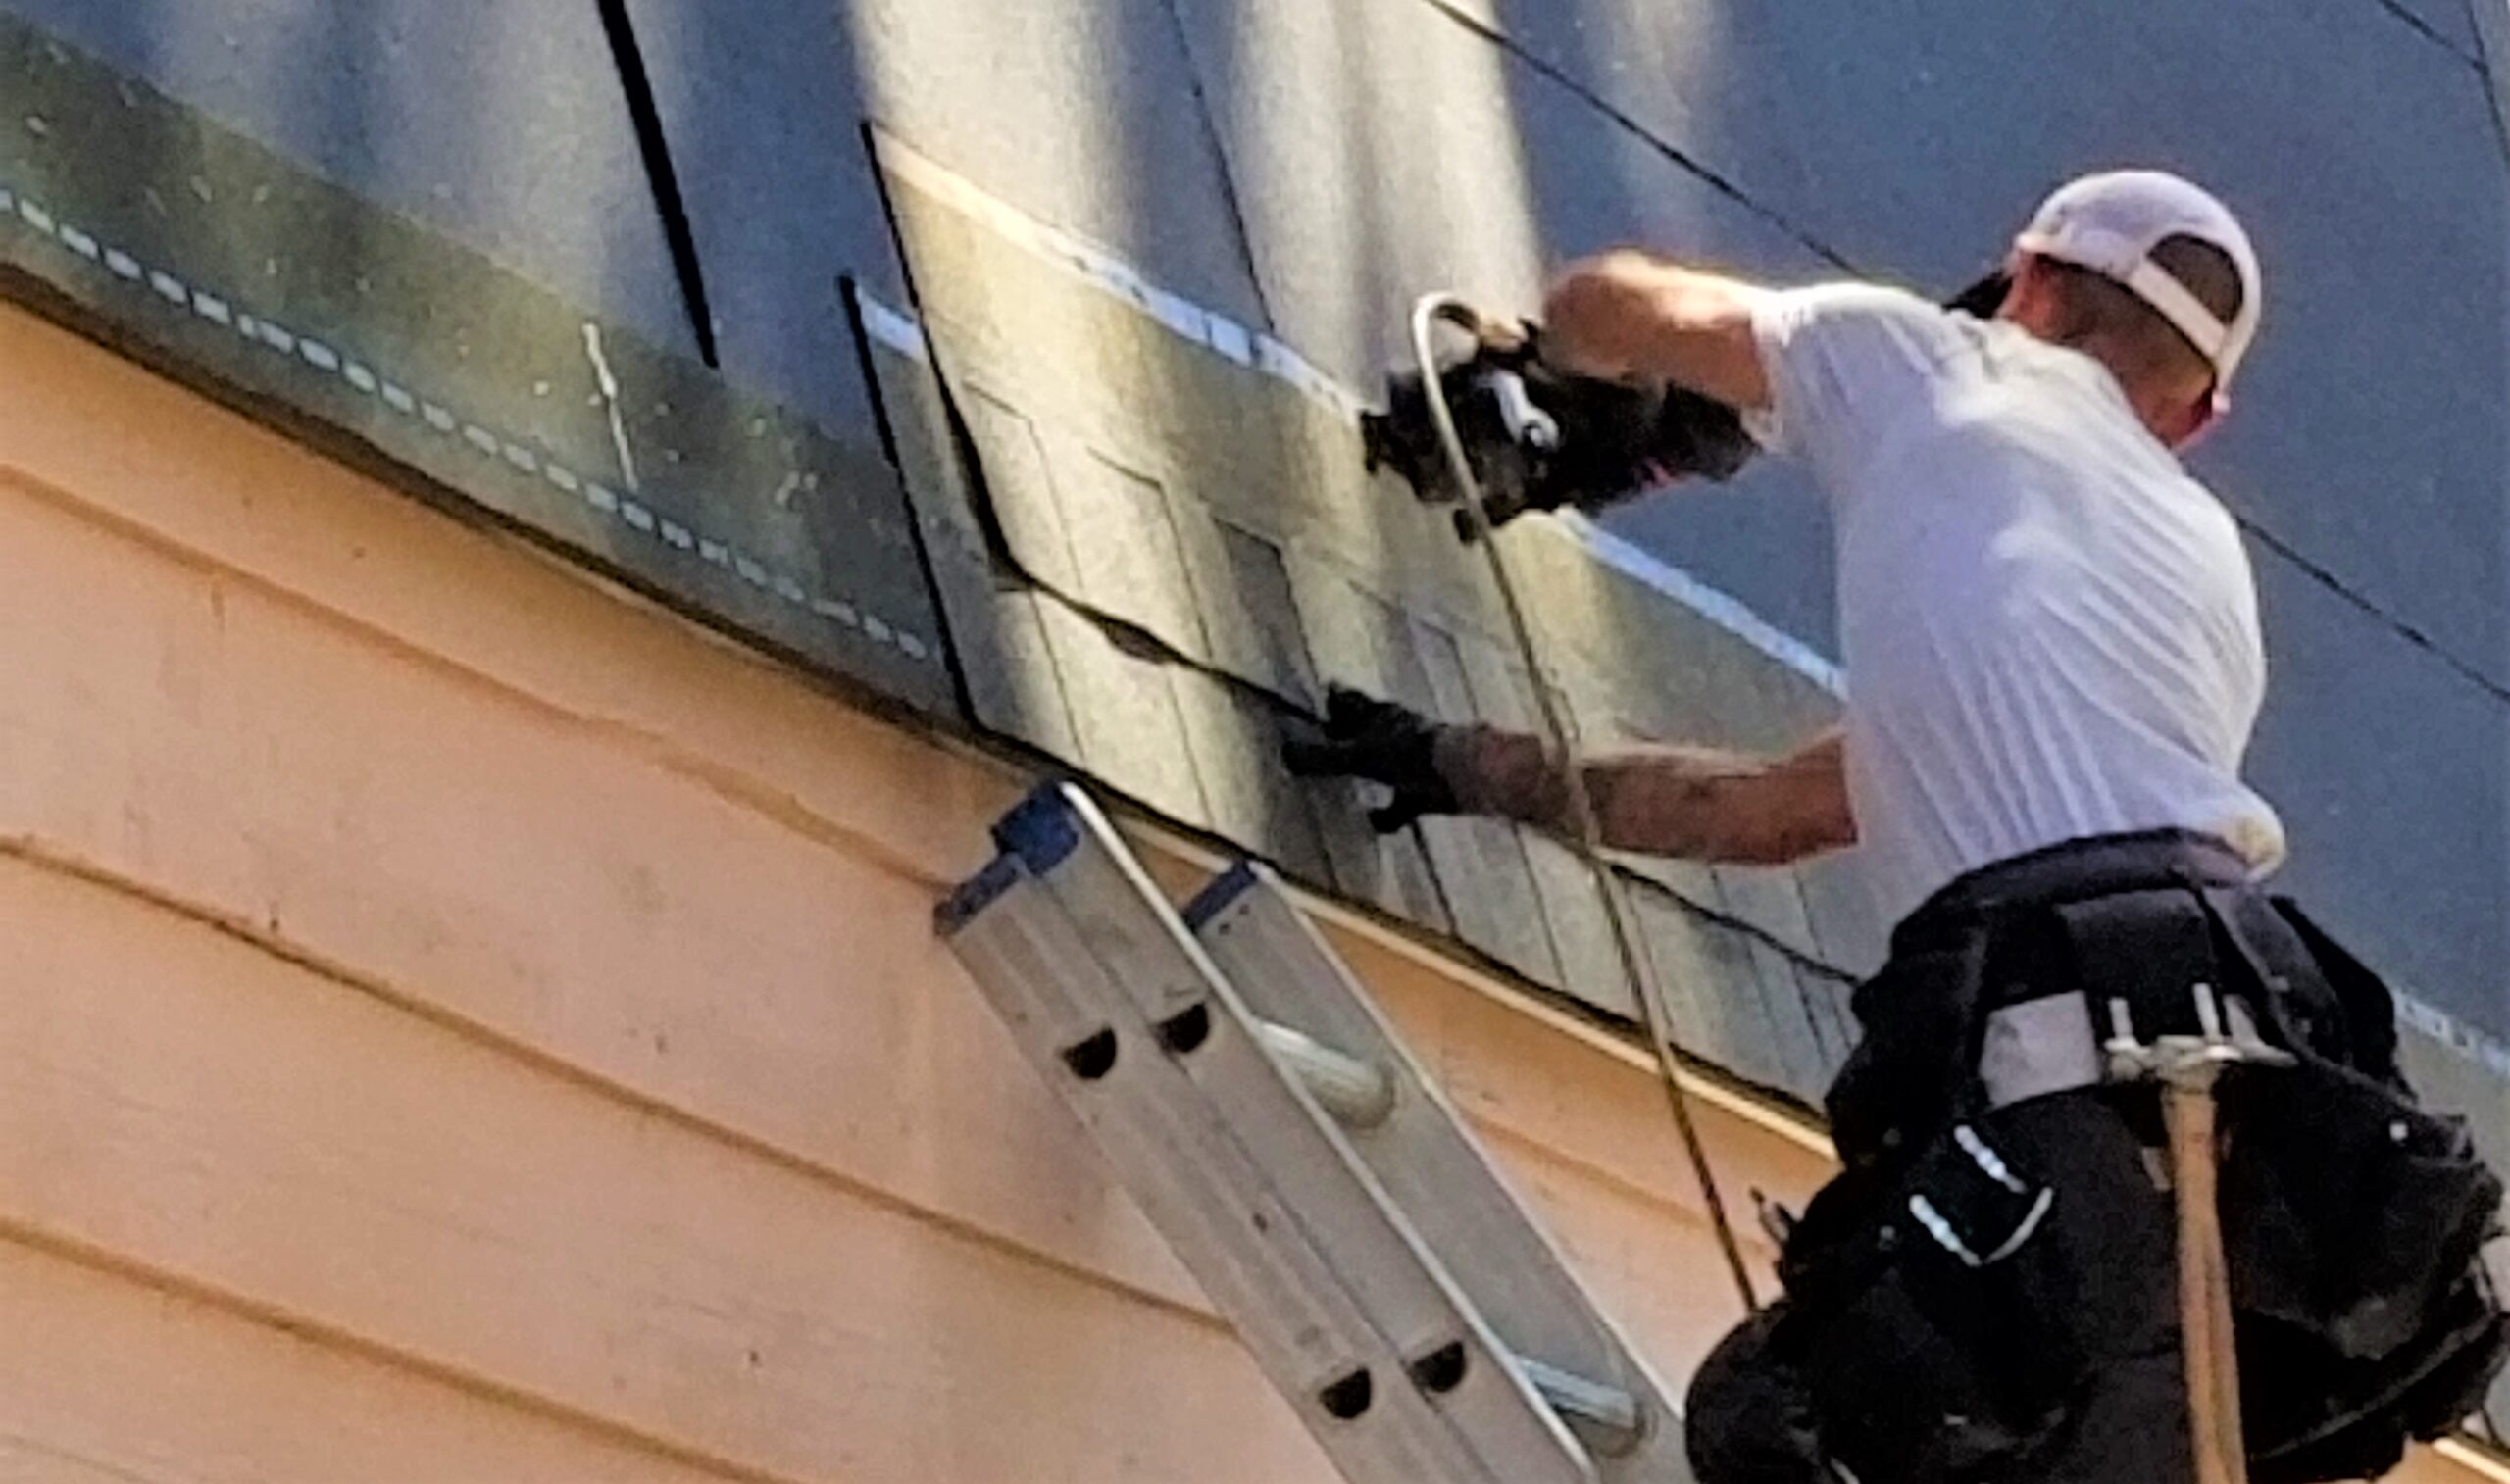 Commercial Roof Replacement and Commercial Roof Repairs in Weston, FL